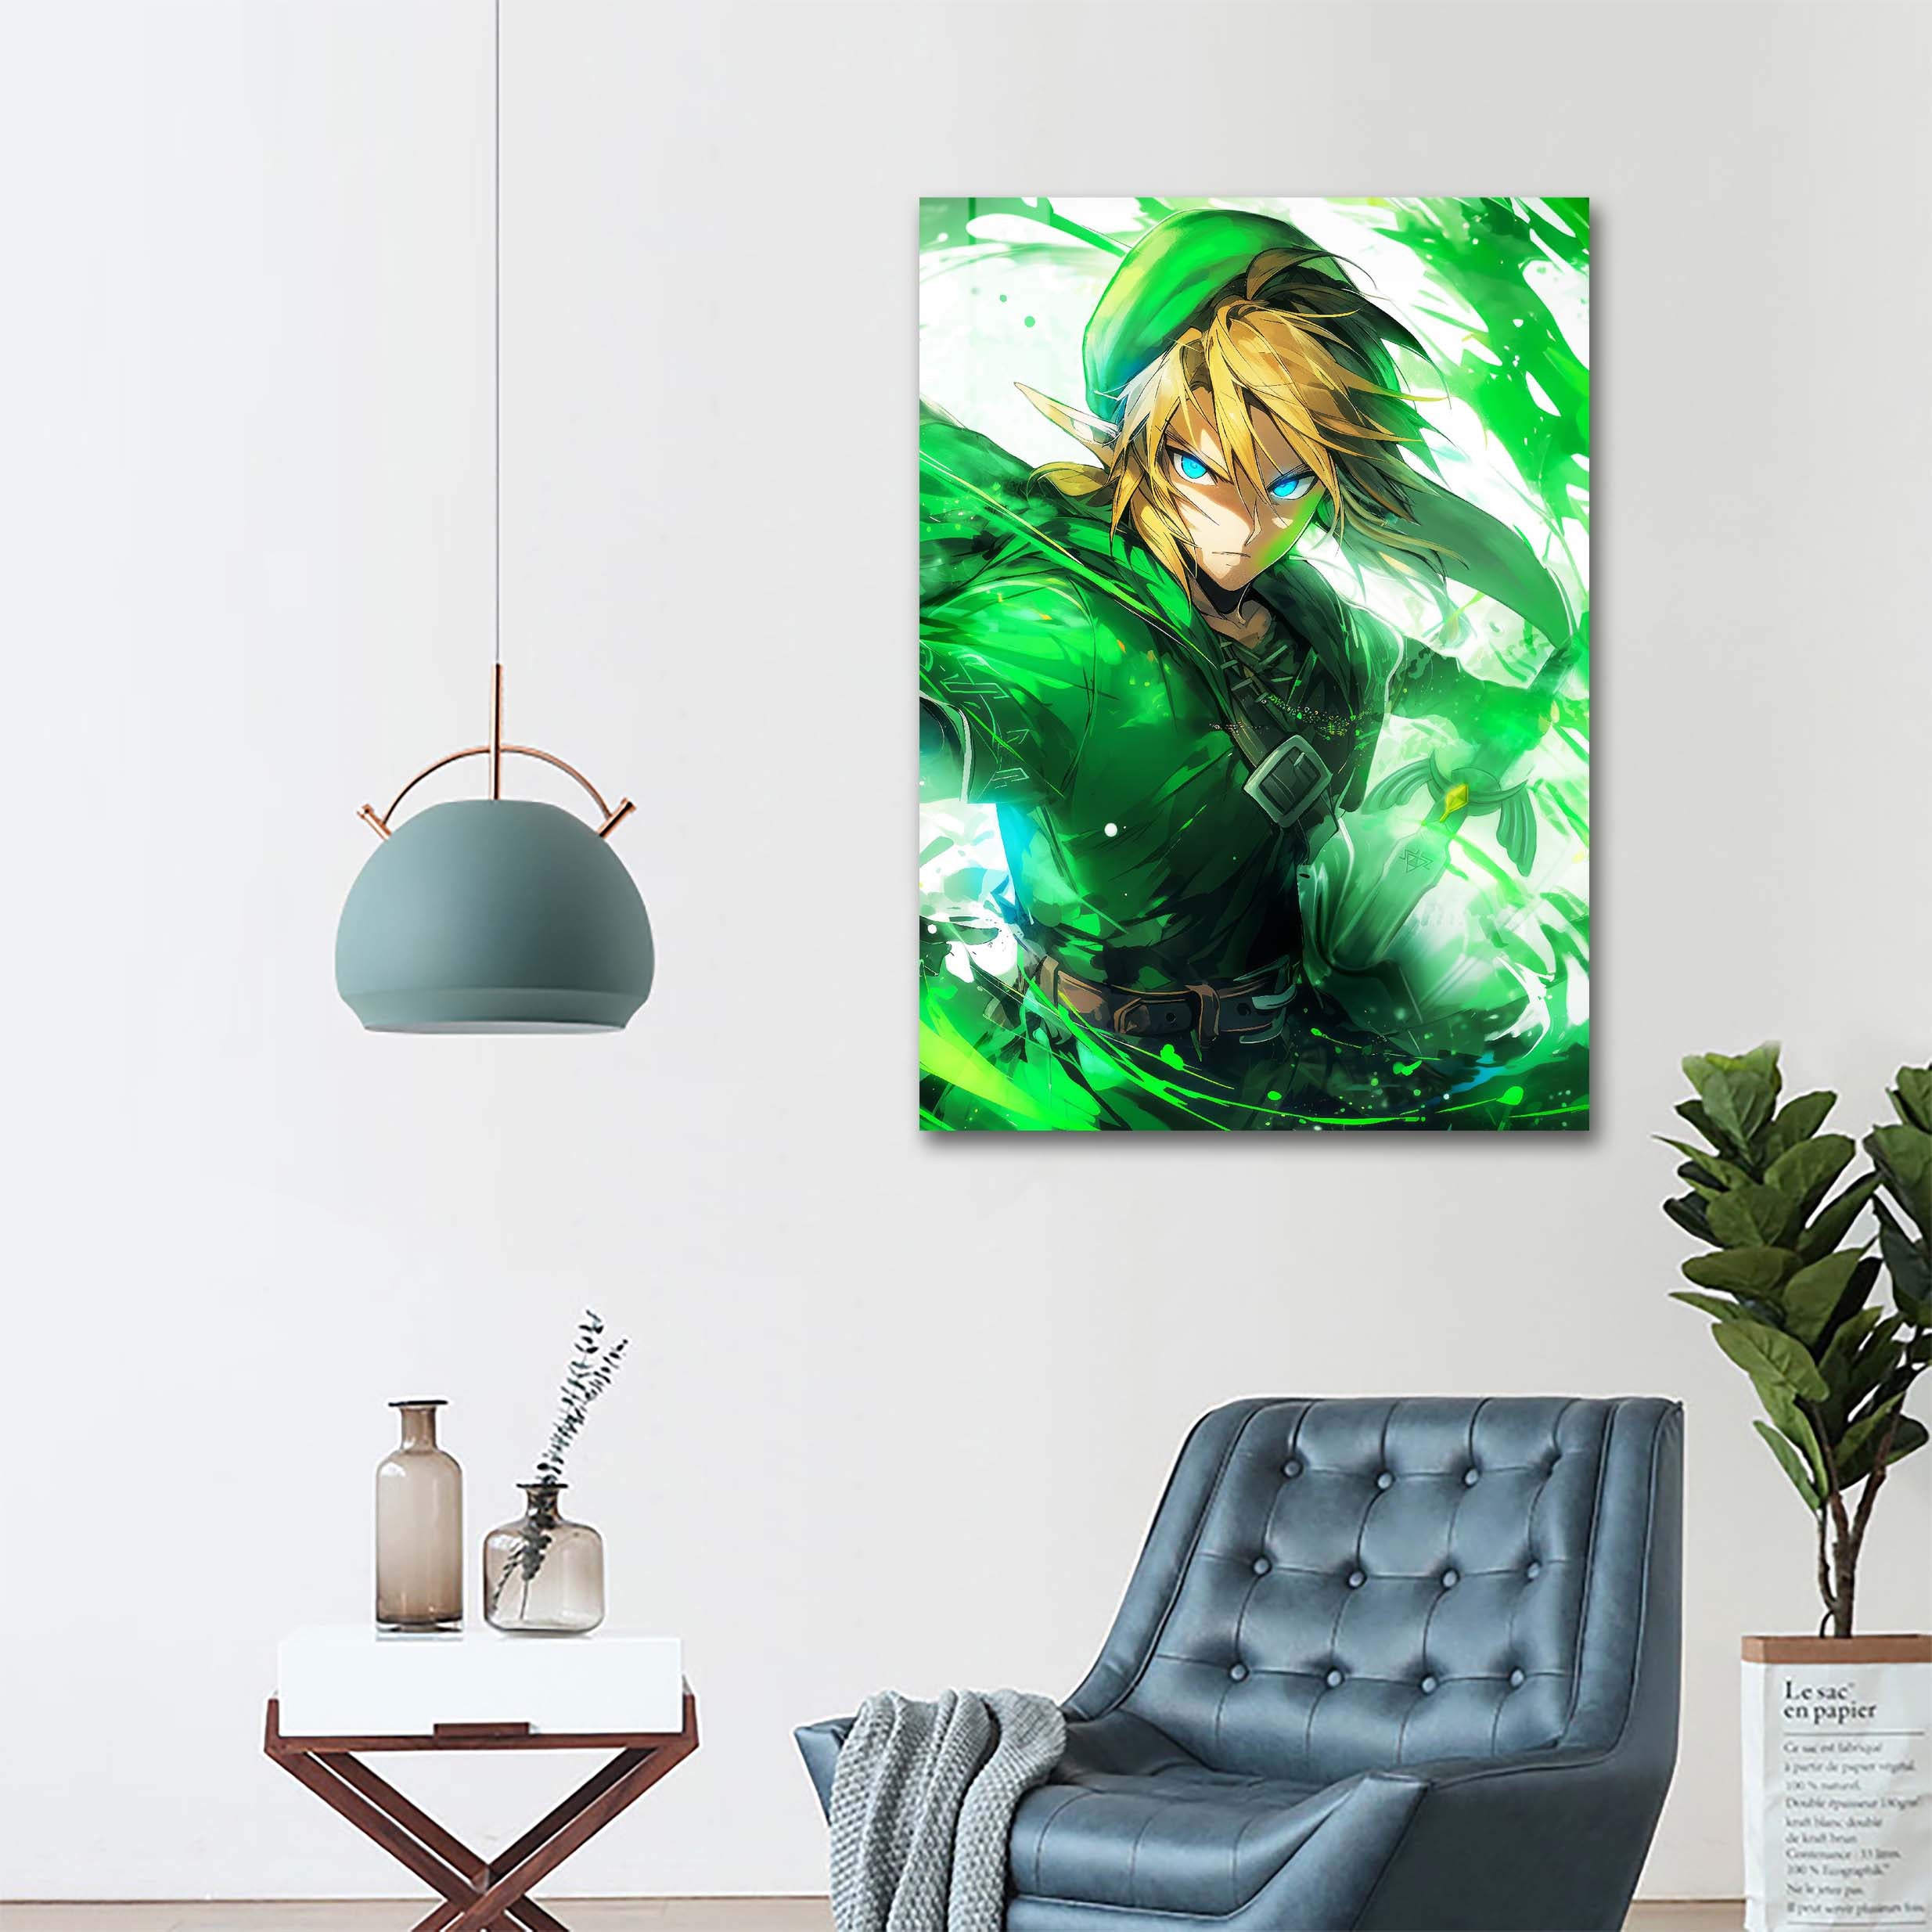 Link - Ocarina of Time -Artwork by @EosVisions